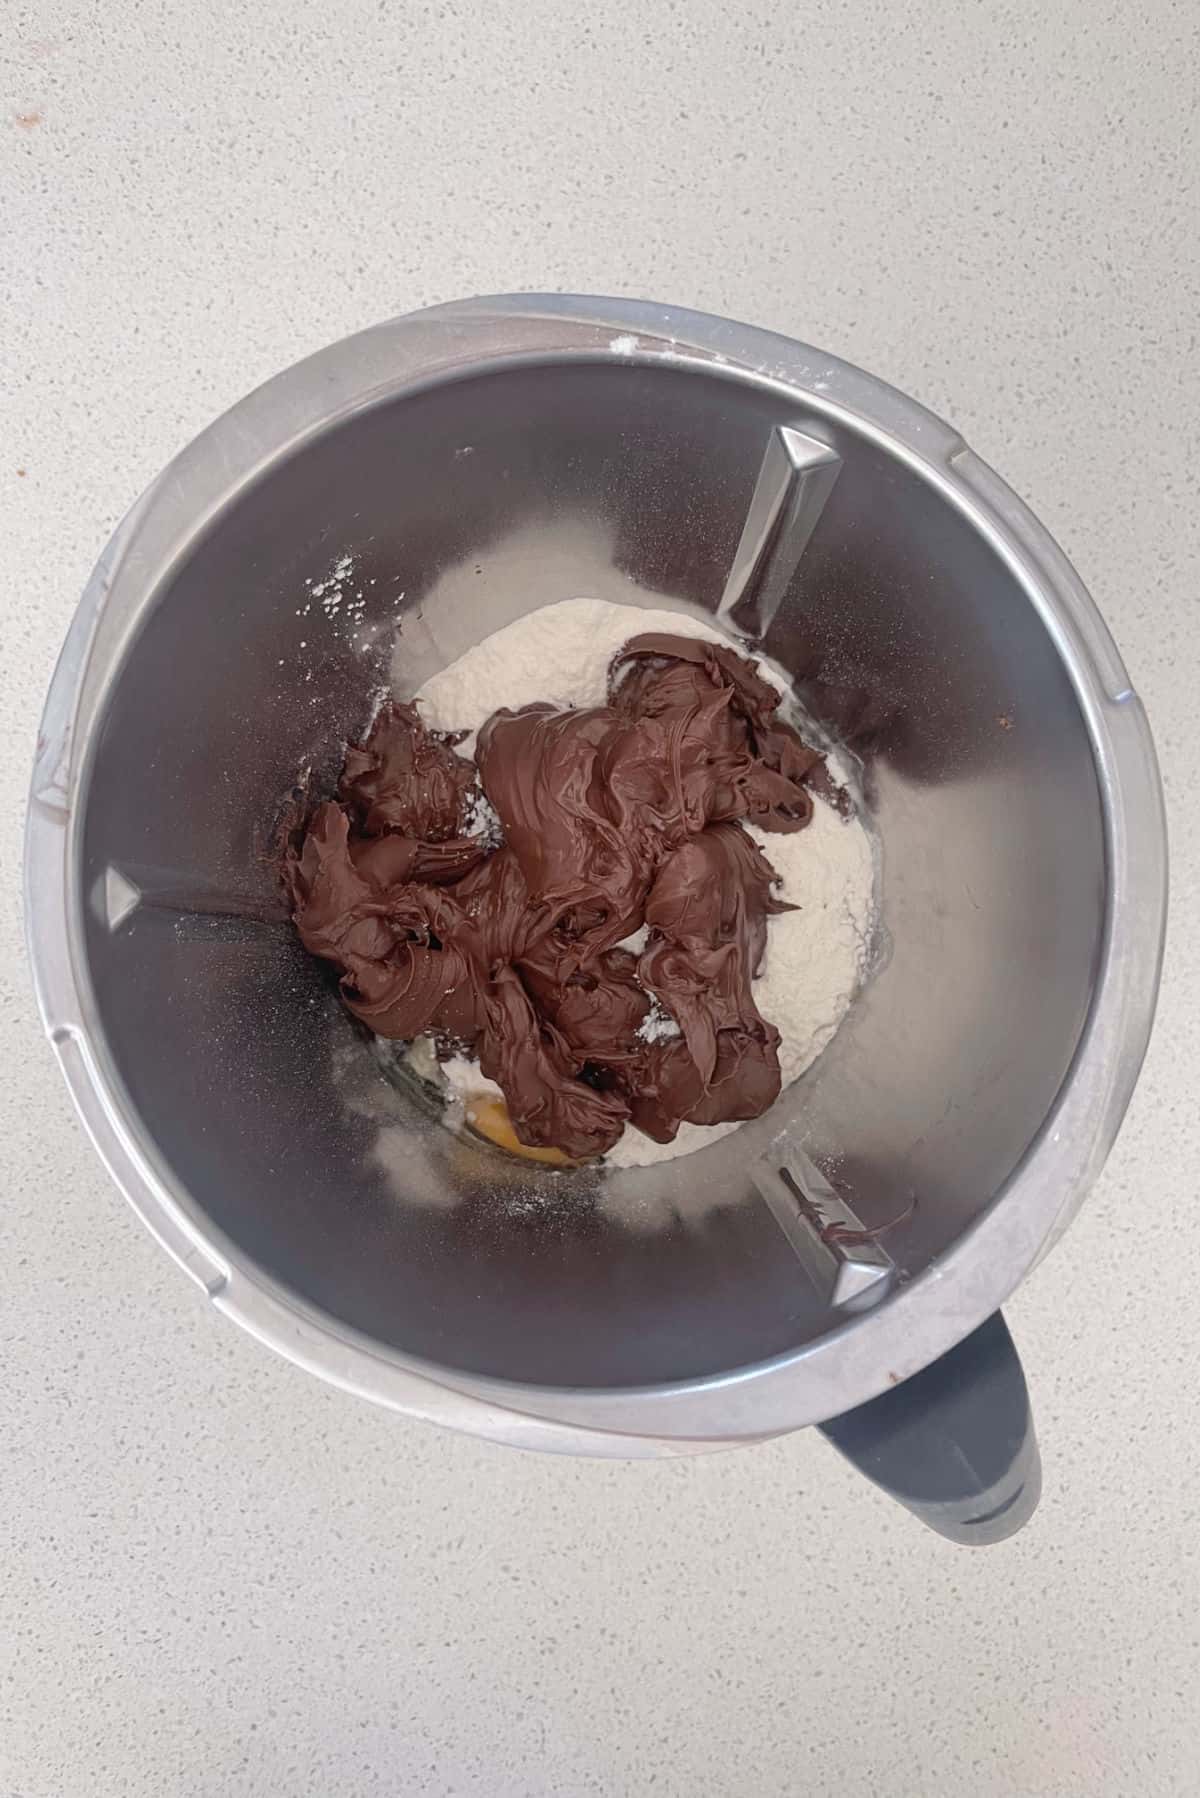 Nutella Brownie ingredients in a thermomix bowl.